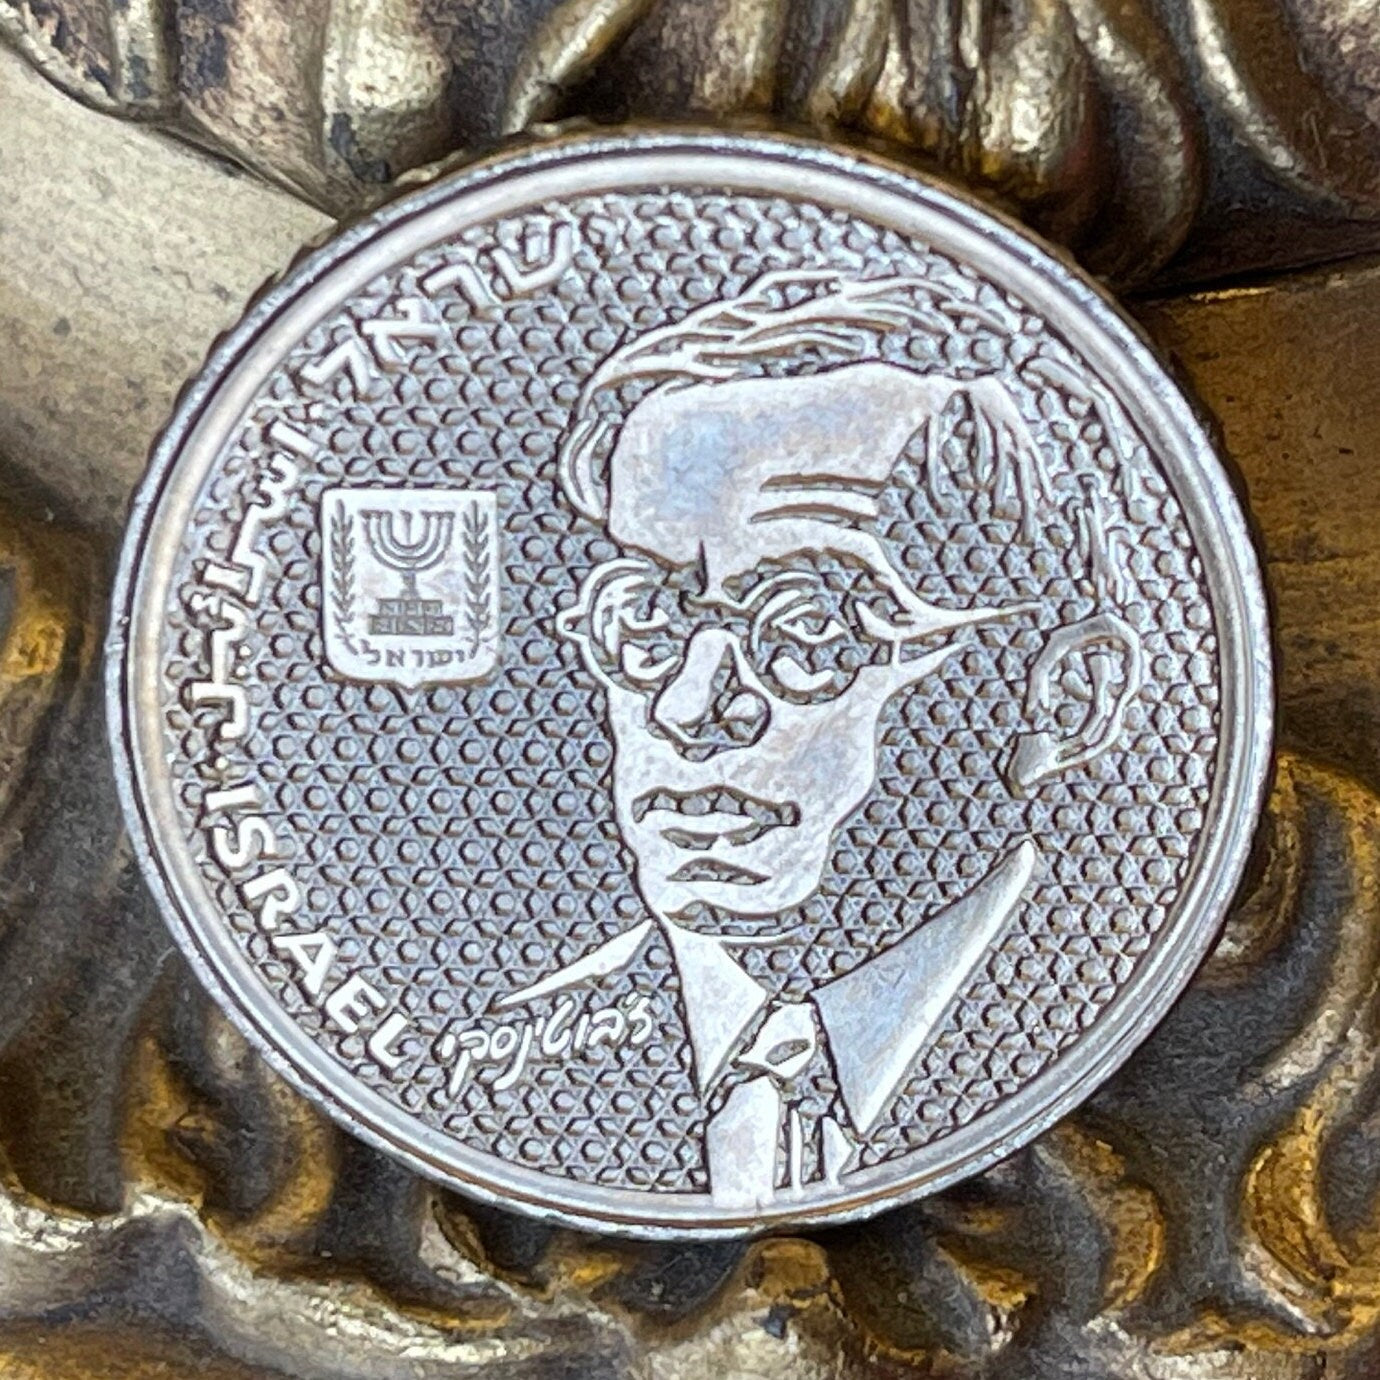 Ze'ev Jabotinsky 100 Shequalim Israel Authentic Coin Money for Jewelry and Craft Making (Zionism) (Likud) (1985)